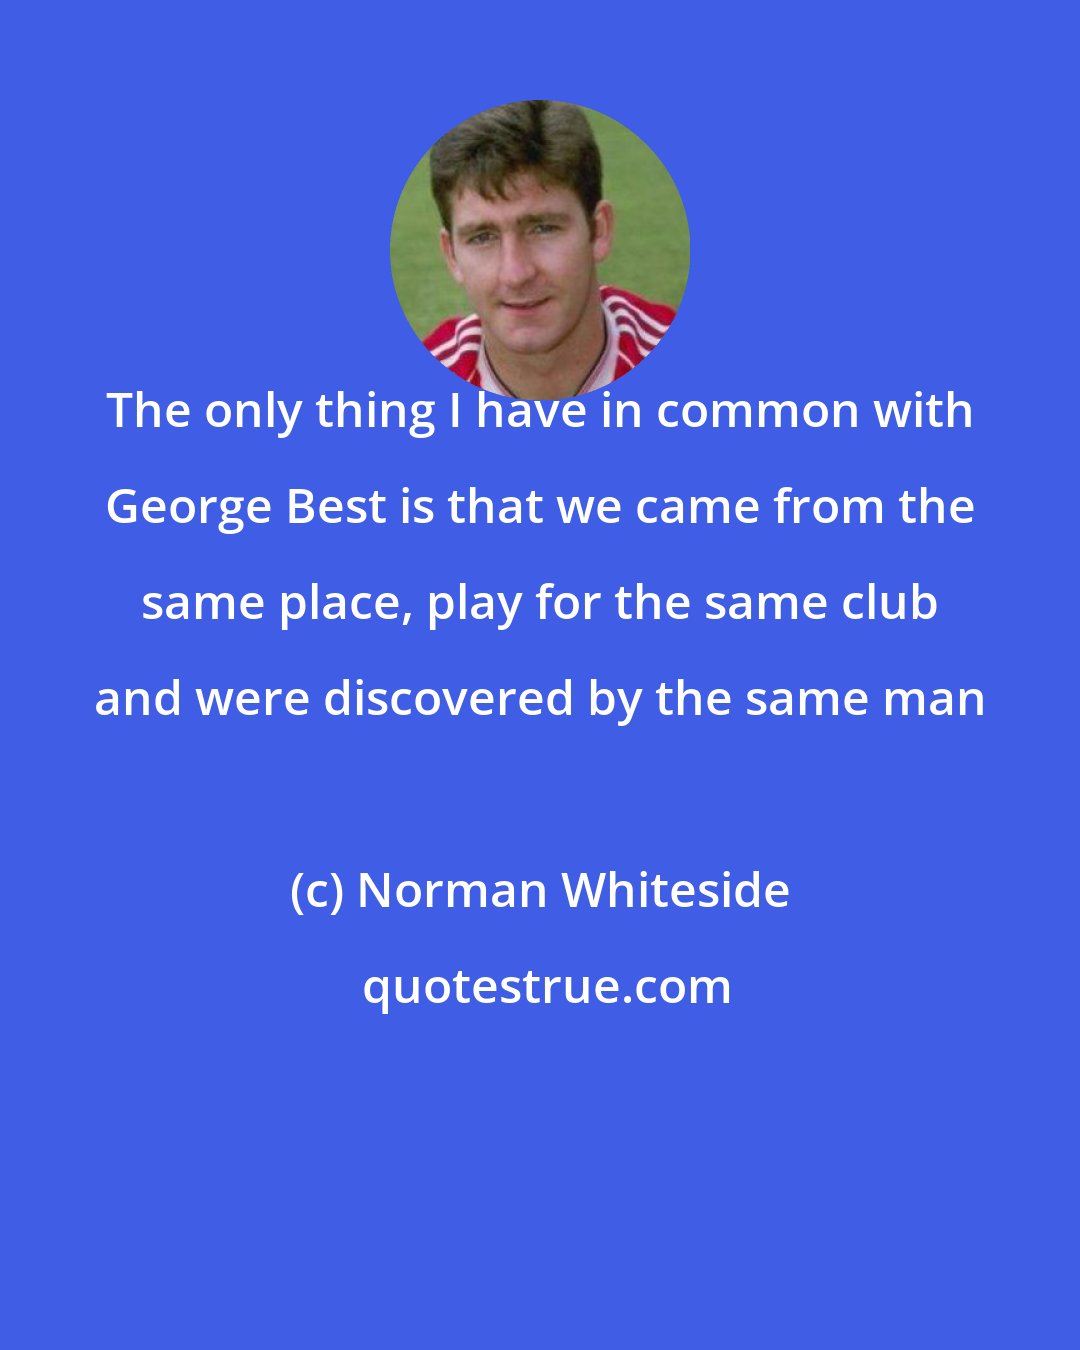 Norman Whiteside: The only thing I have in common with George Best is that we came from the same place, play for the same club and were discovered by the same man